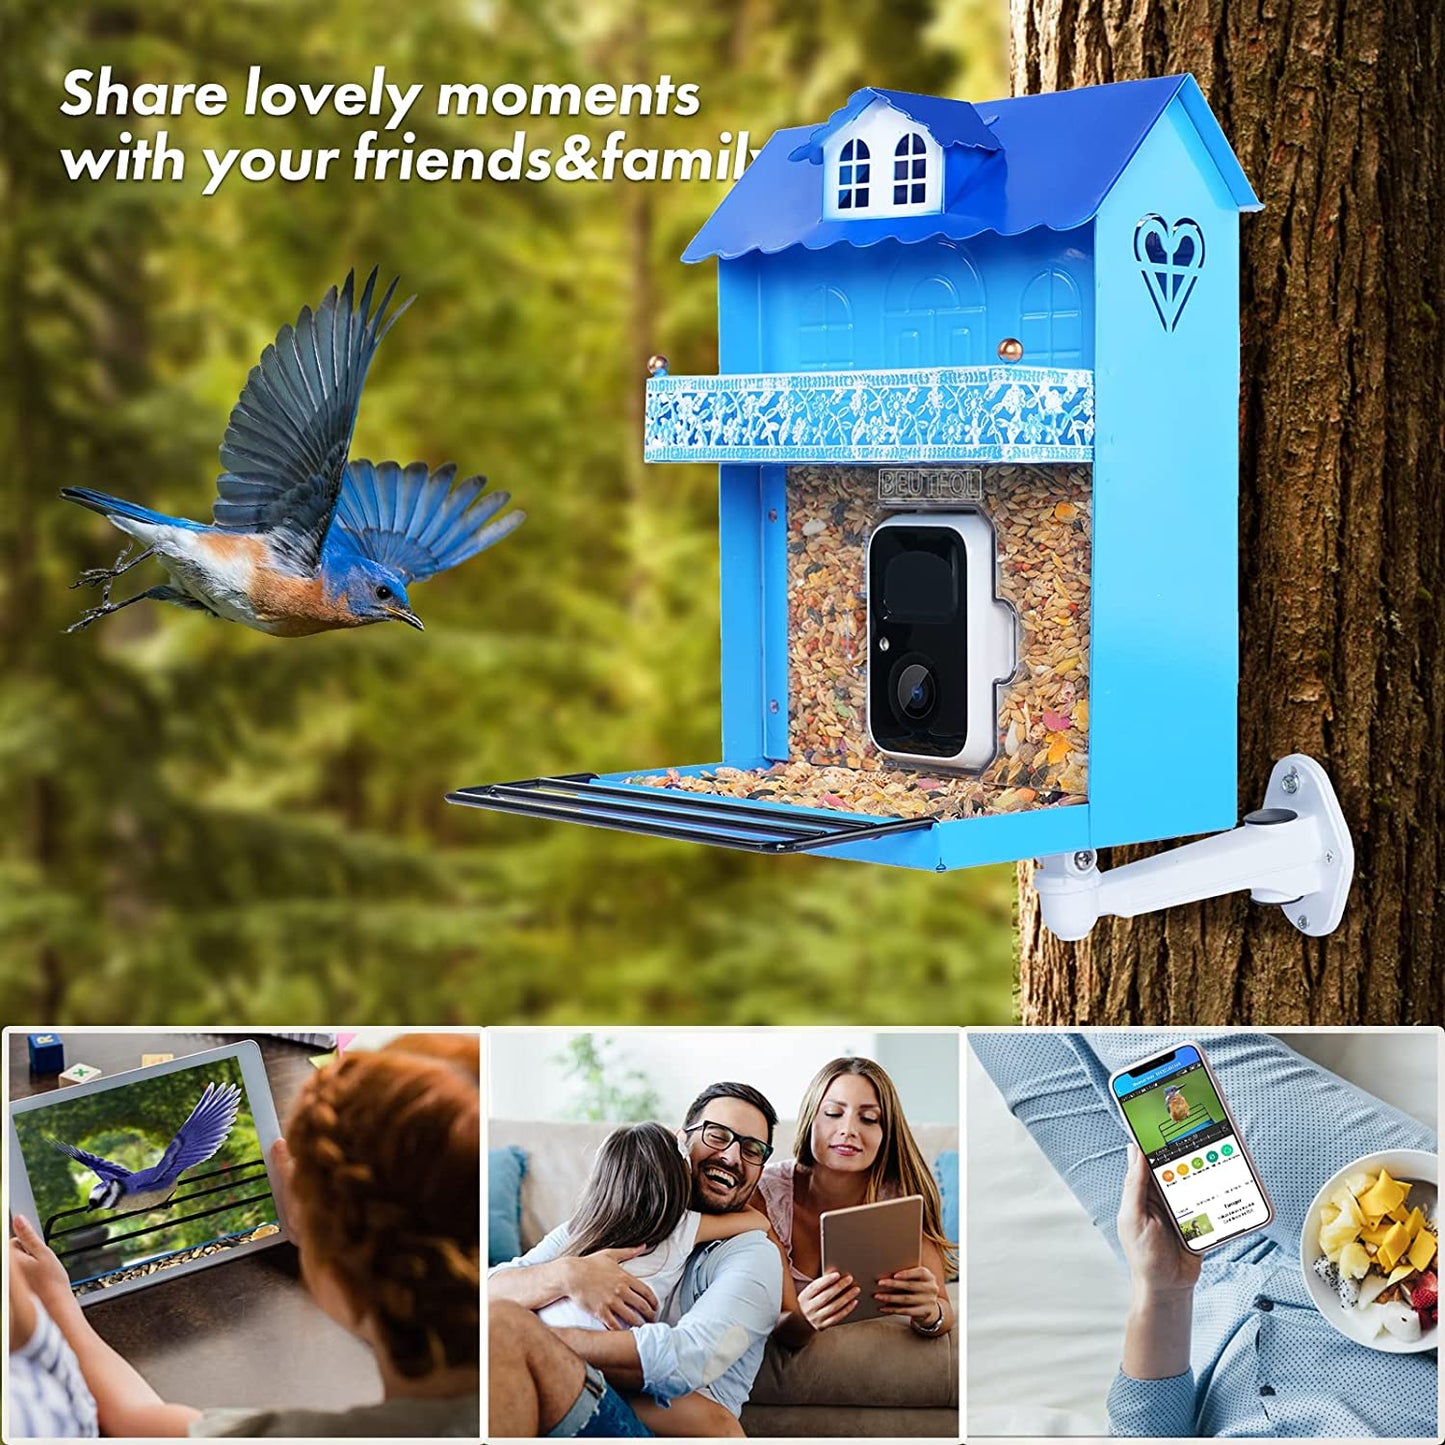 Smart Bird Feeder with Camera,Bird Feeder Camera Auto Capture Birds and Notify,Ip65 Rainproof 1080P HD Full Color Night Vision Bird House Camera,Free 32G SD Card, Ideal Gift for Family